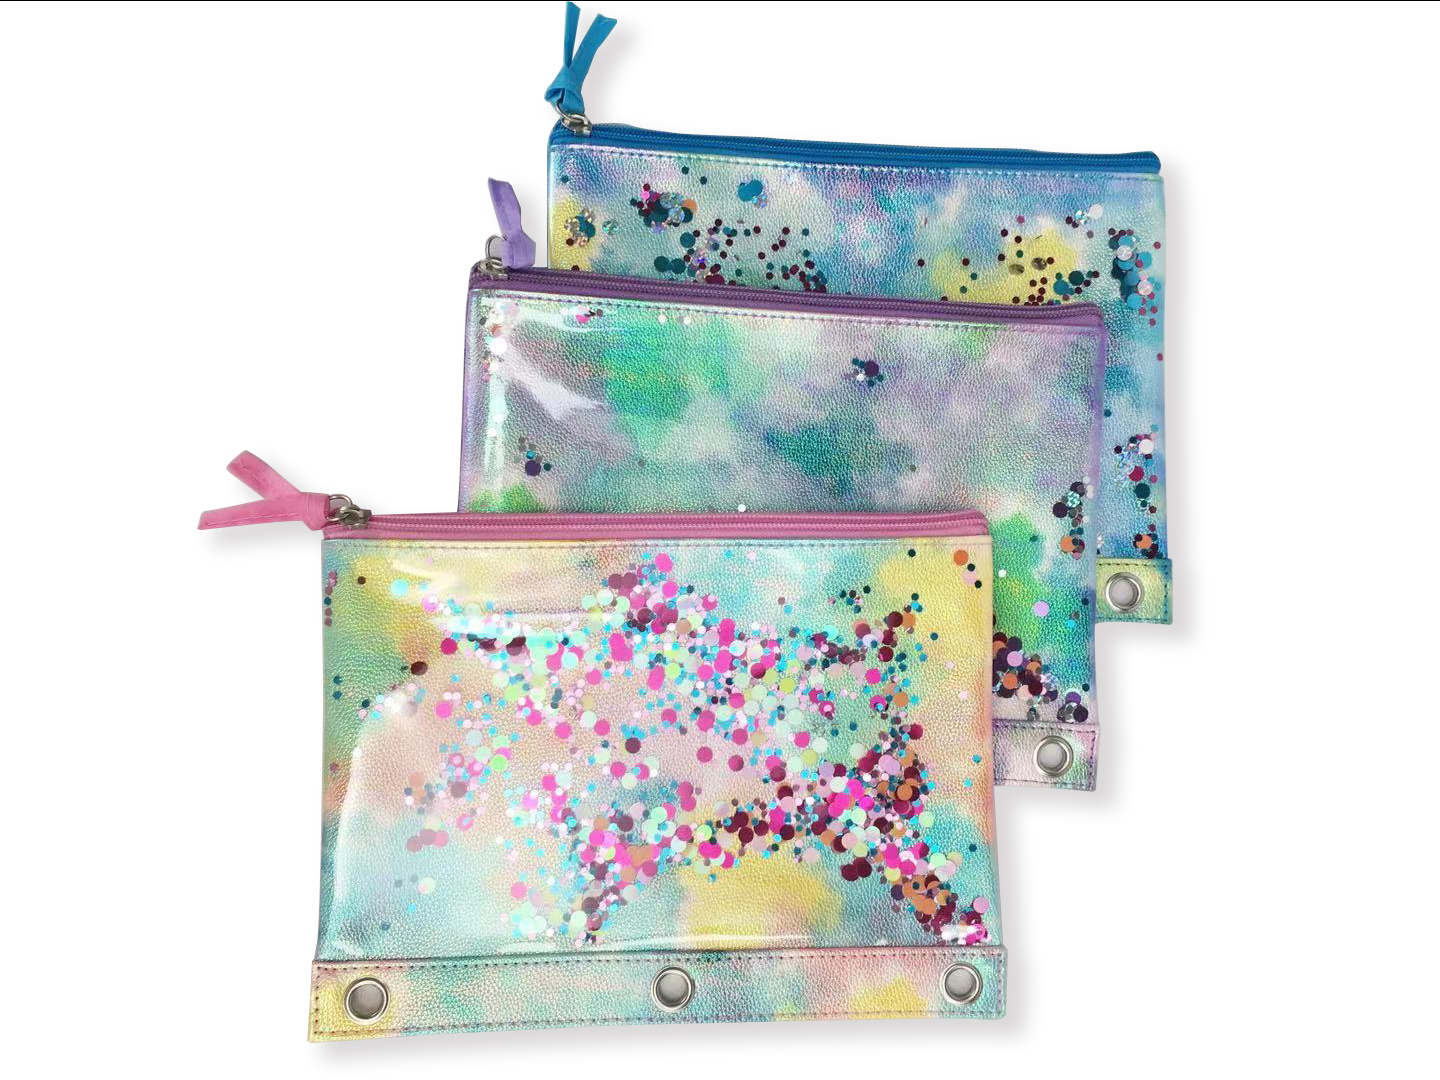 Iridescent transparency shiny sparkly colorful glitter sequin sandflow PU leather polyester binder pouch pencil bag with zipper closure with 3-round rings great gift for kids teens adults for school office daily use